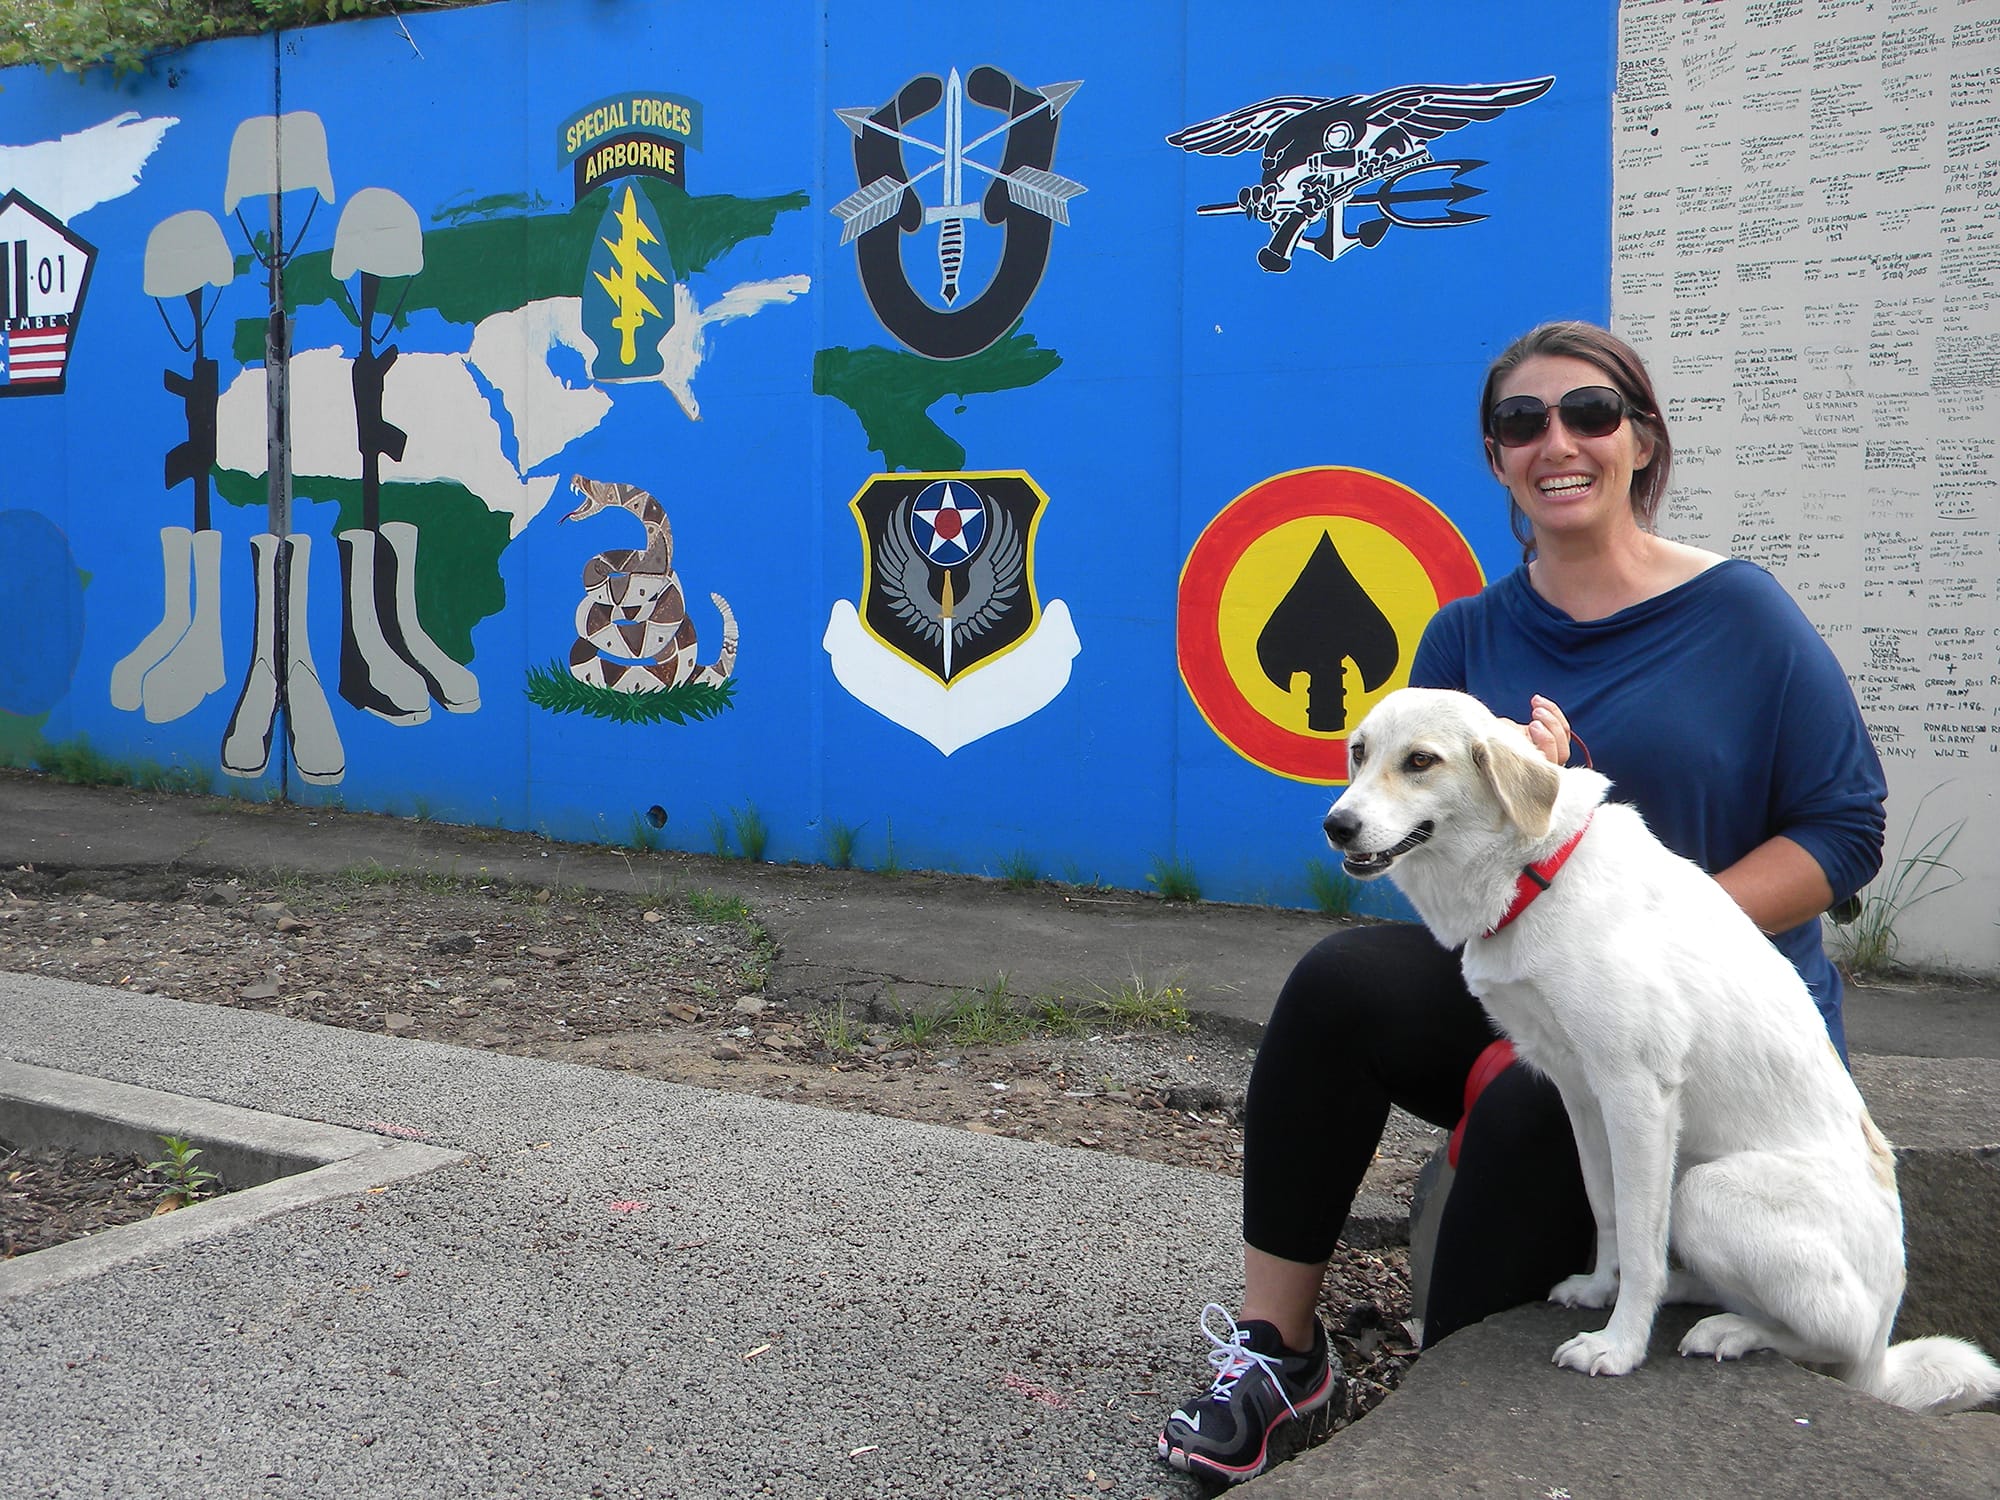 Olympia Yarger and Snicklefritz, who was with her husband's team in Afghanistan, stop during their cross-country trip to visit the segment of Vancouver's Remembrance Wall dedicated to current military operations.